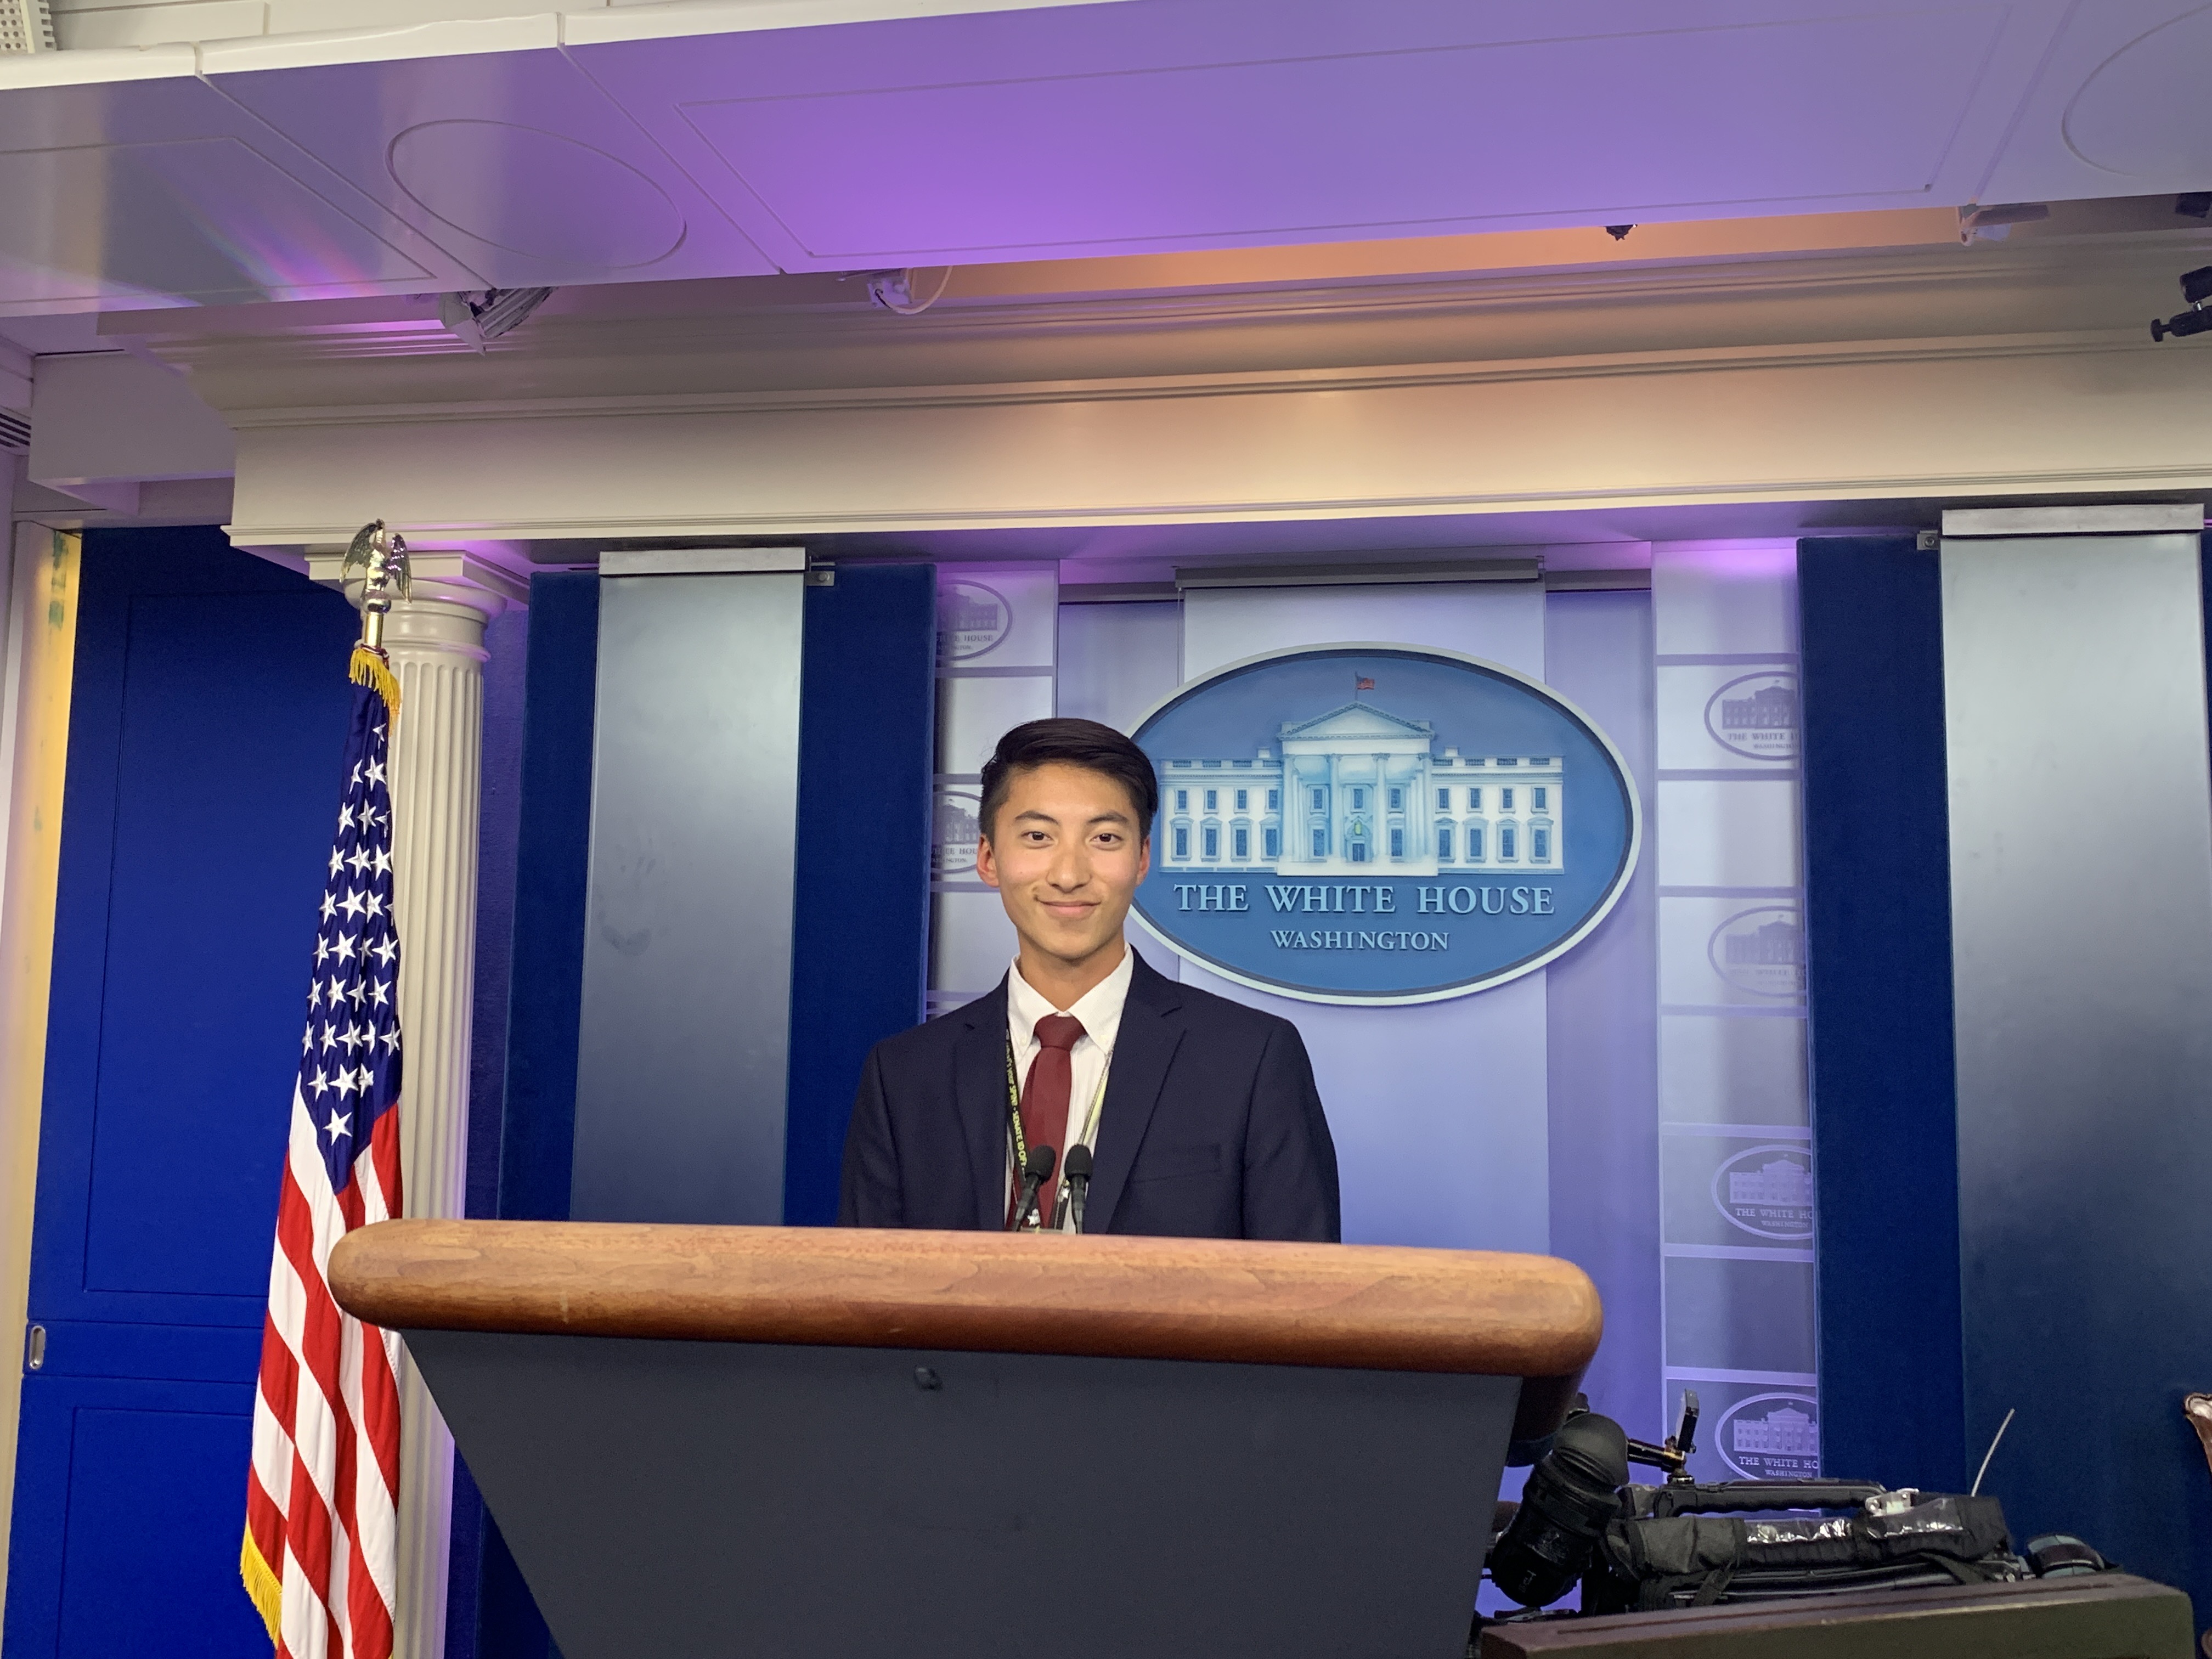 ASU Student Life Storyteller, Bryan Pietsch, poses at a podium in The White House